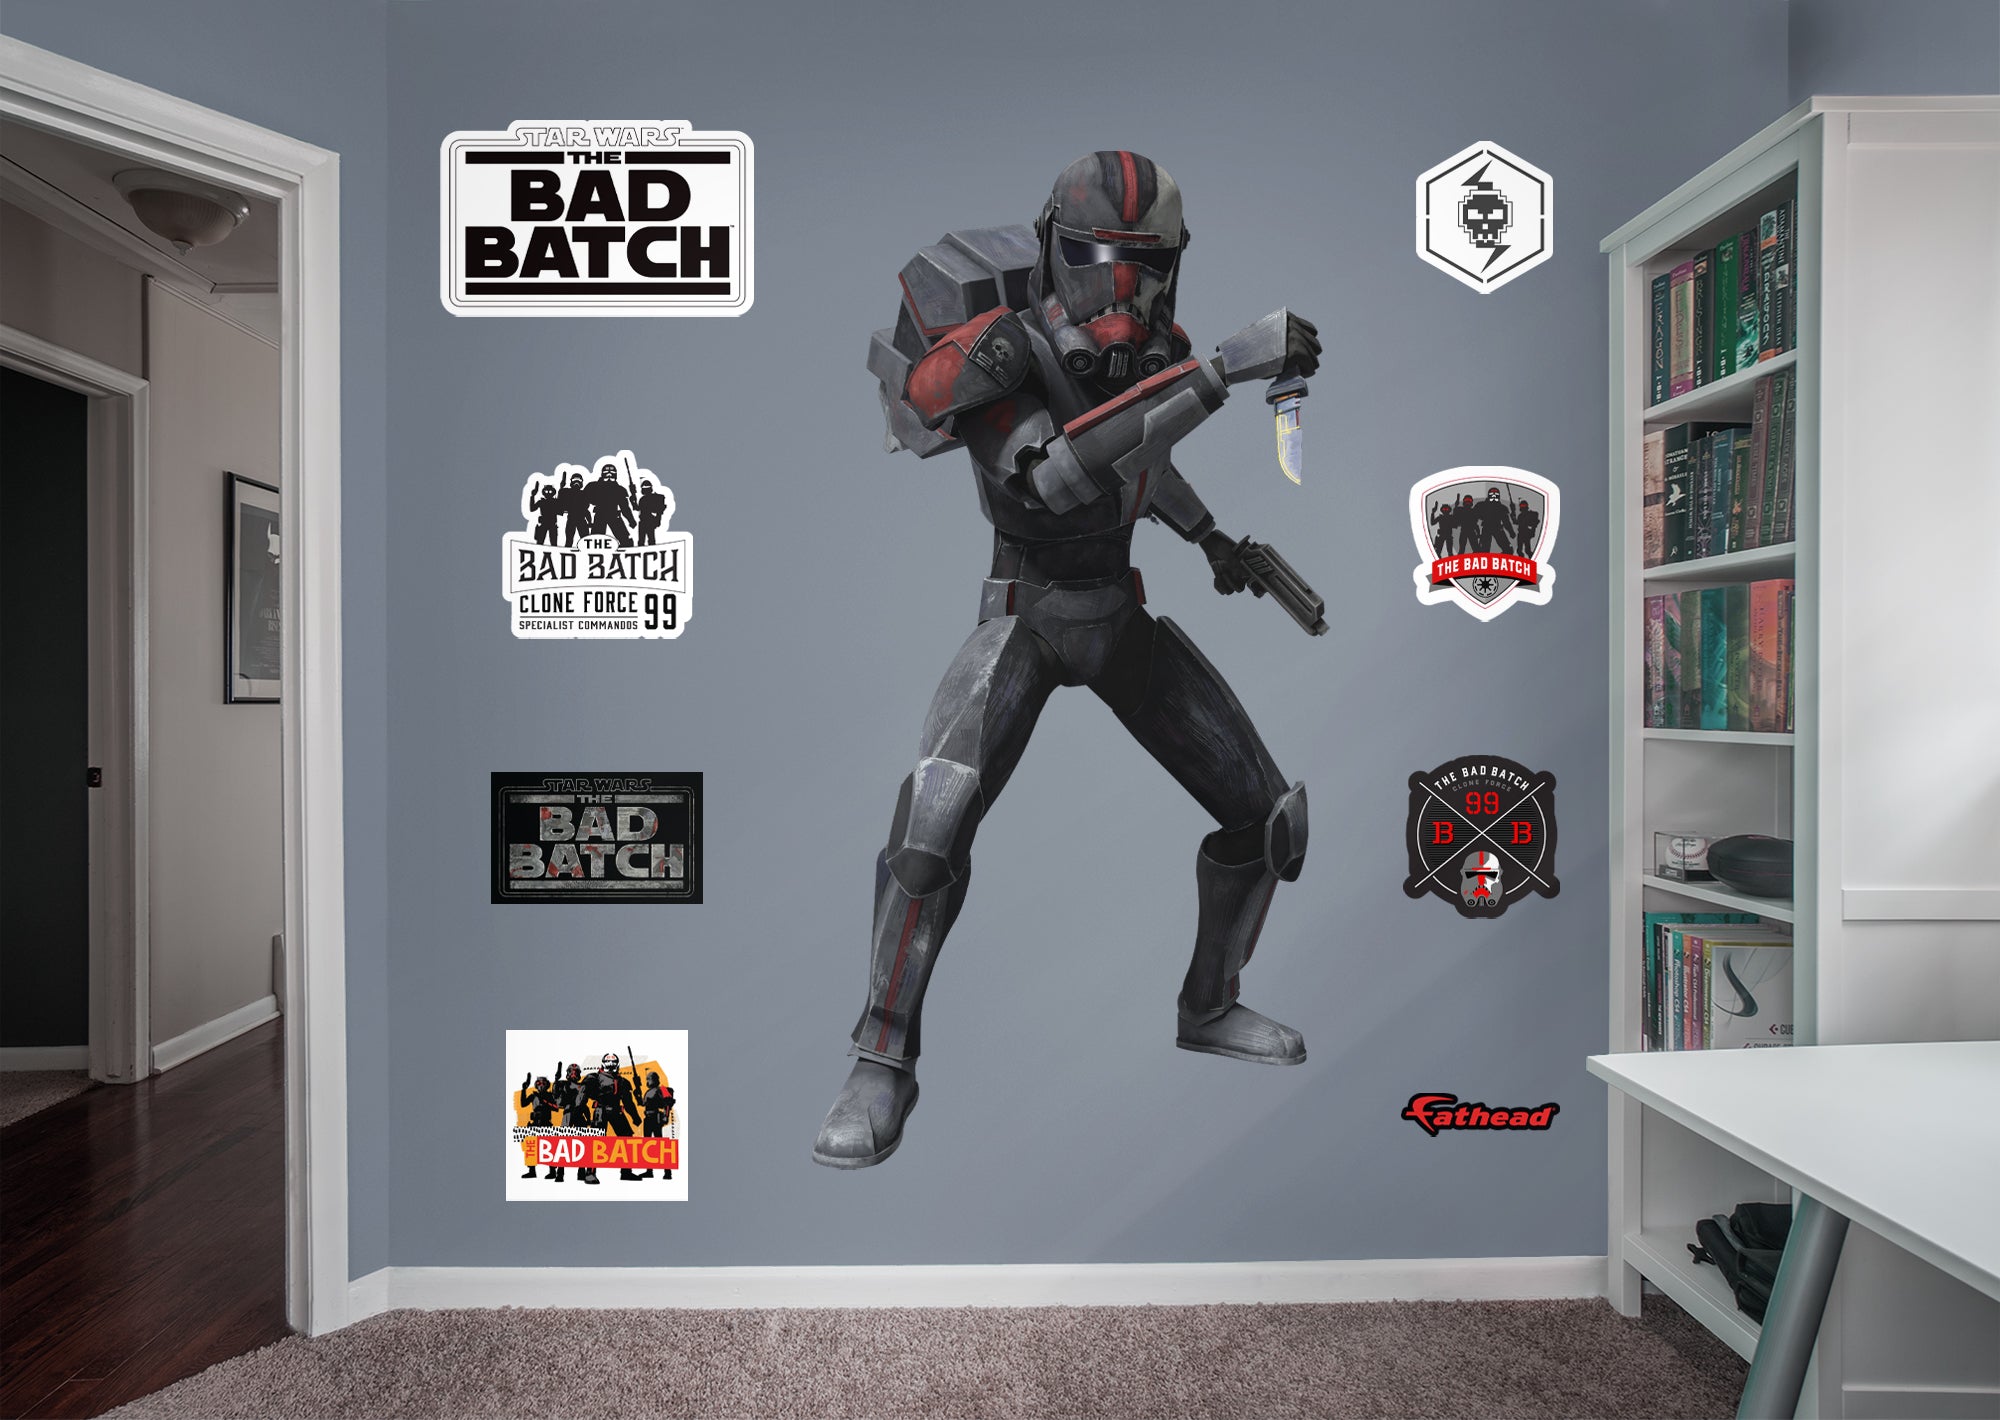 Bad Batch Hunter - Officially Licensed Star Wars Removable Wall Decal Life-Size Character + 2 Decals by Fathead | Vinyl